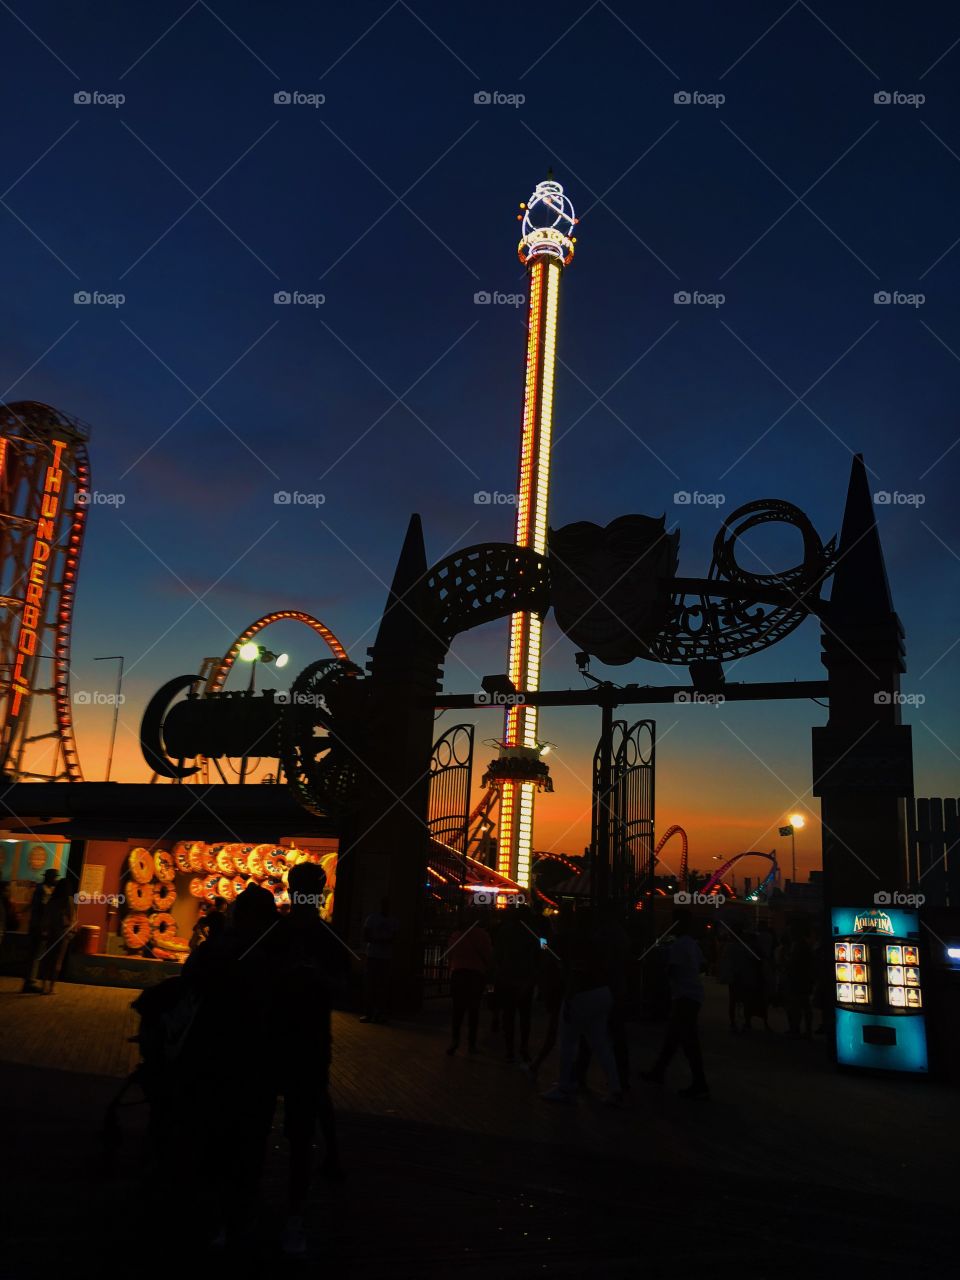 A beautiful night at Coney Island.  Vibrant orange, blue and purple hues and the lights of the rides.